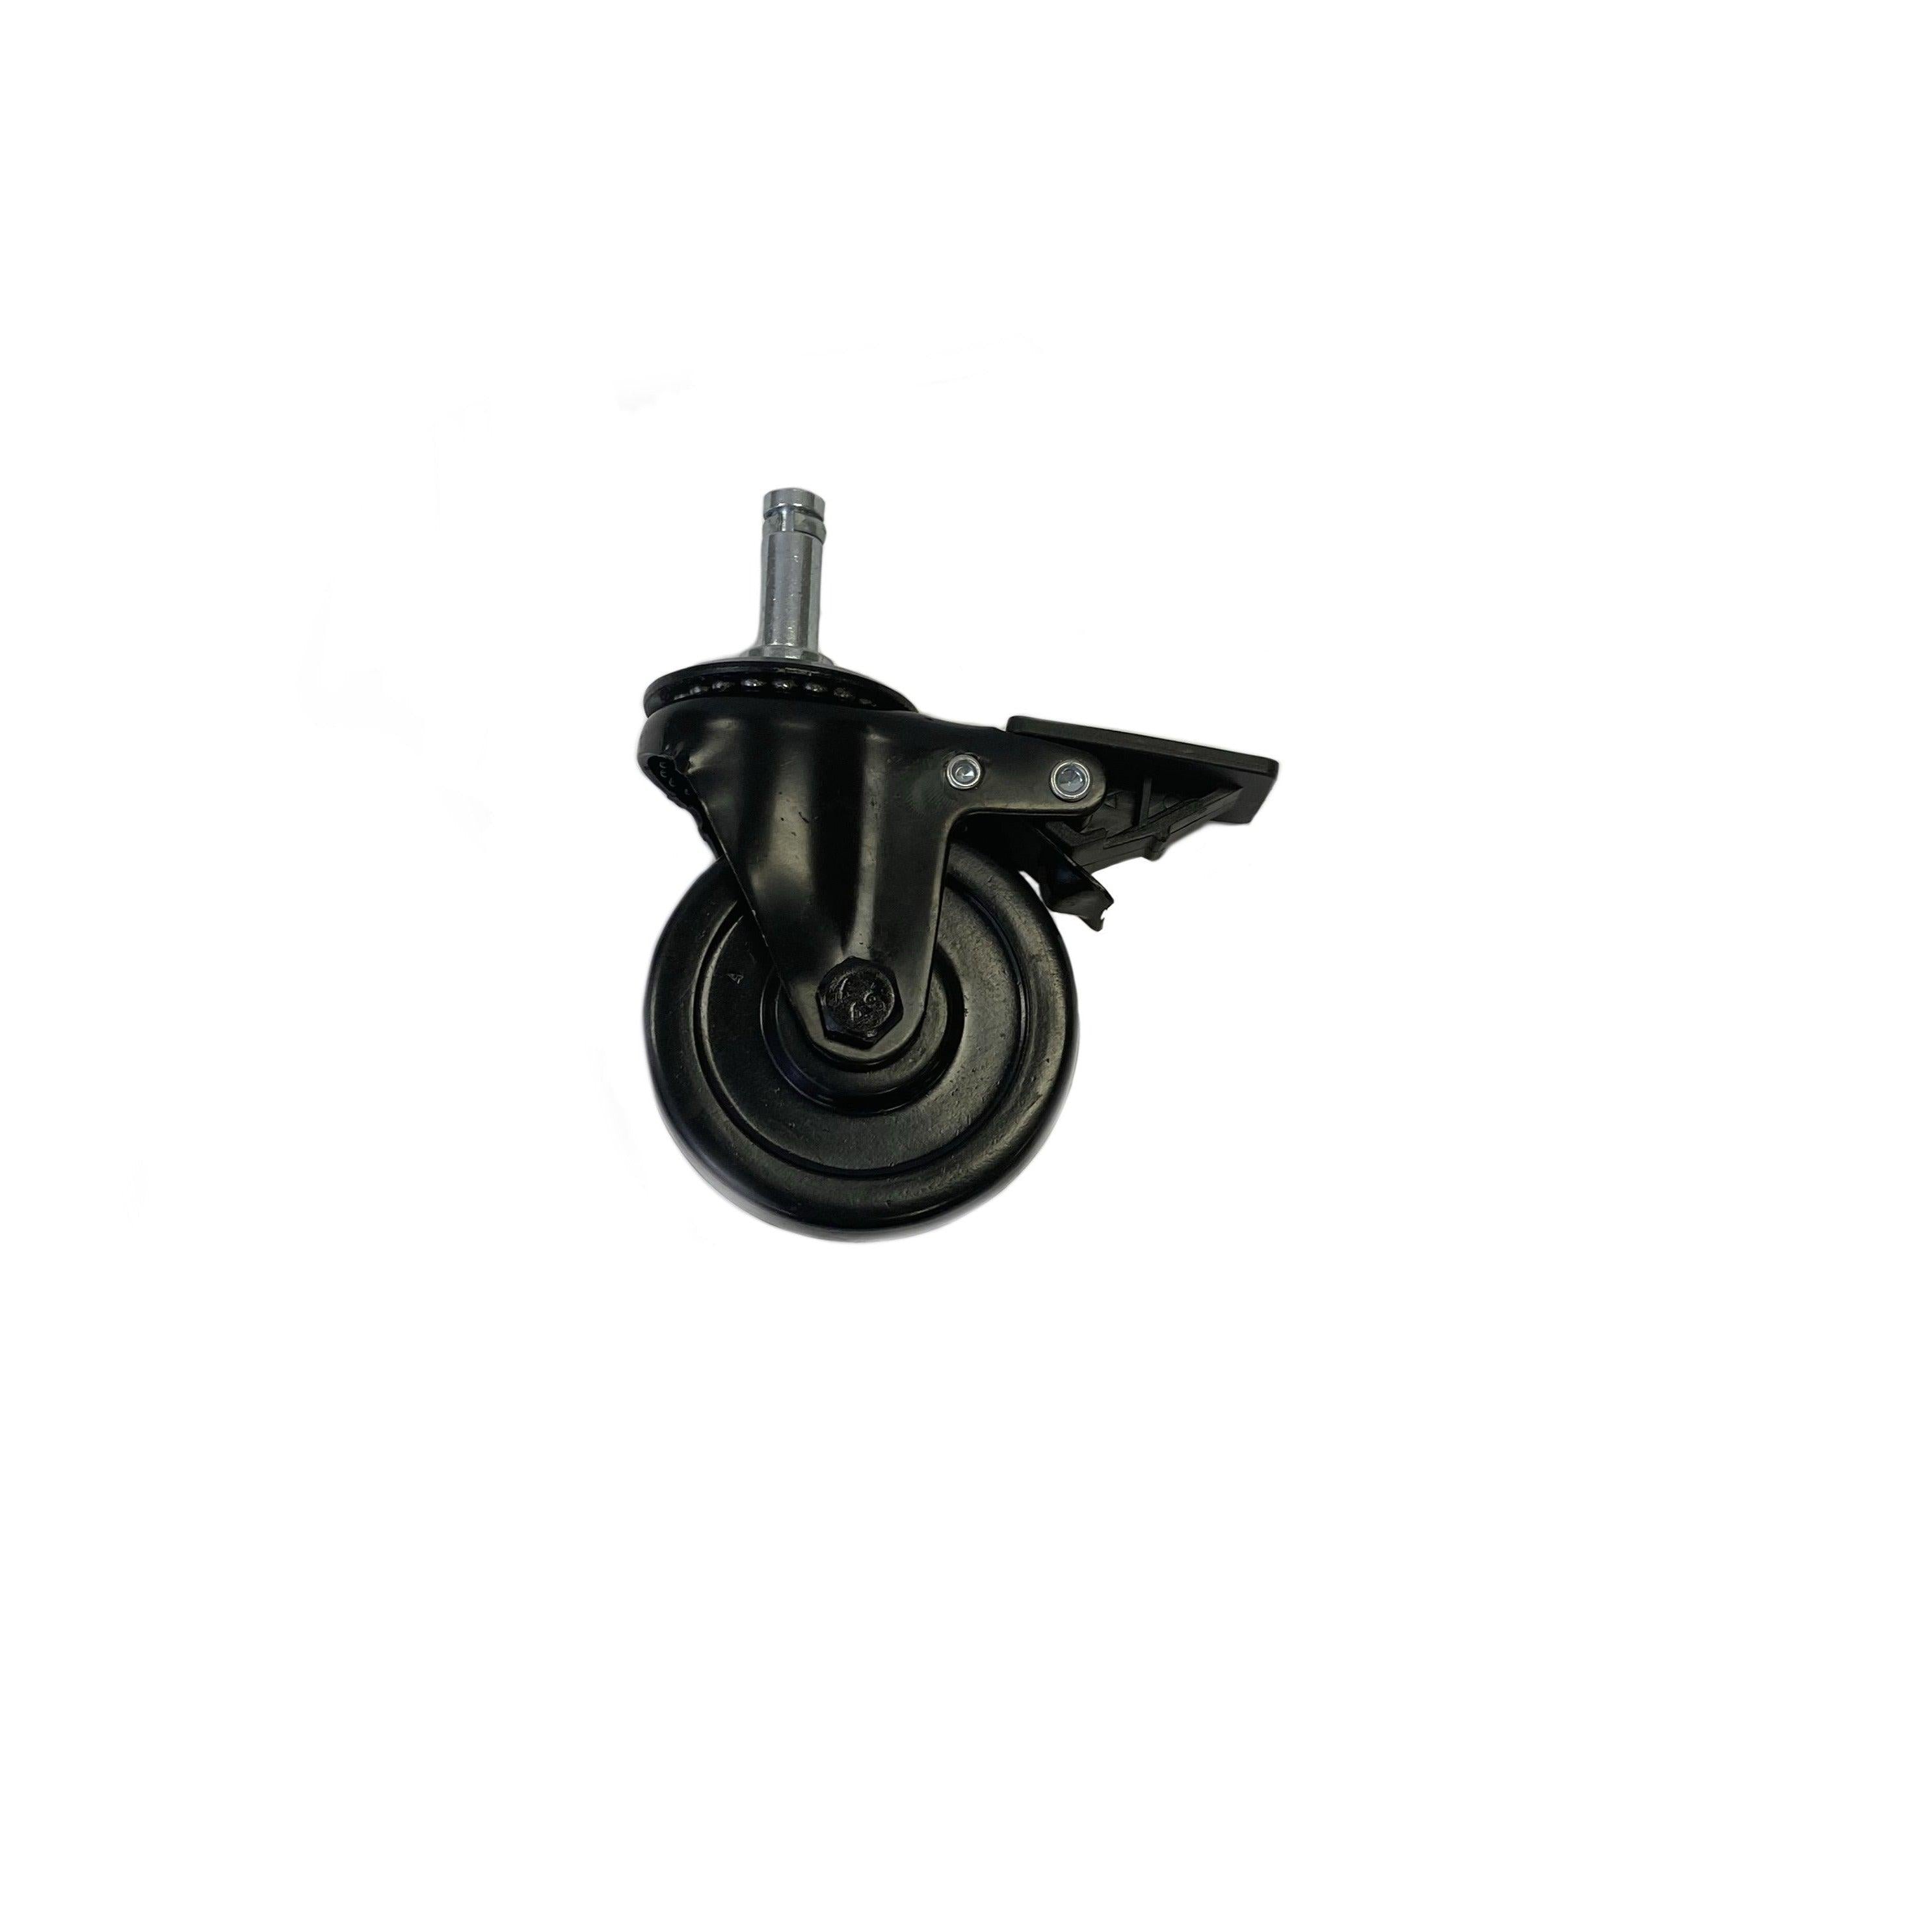 A02120991 Locking Caster - Monument Grills